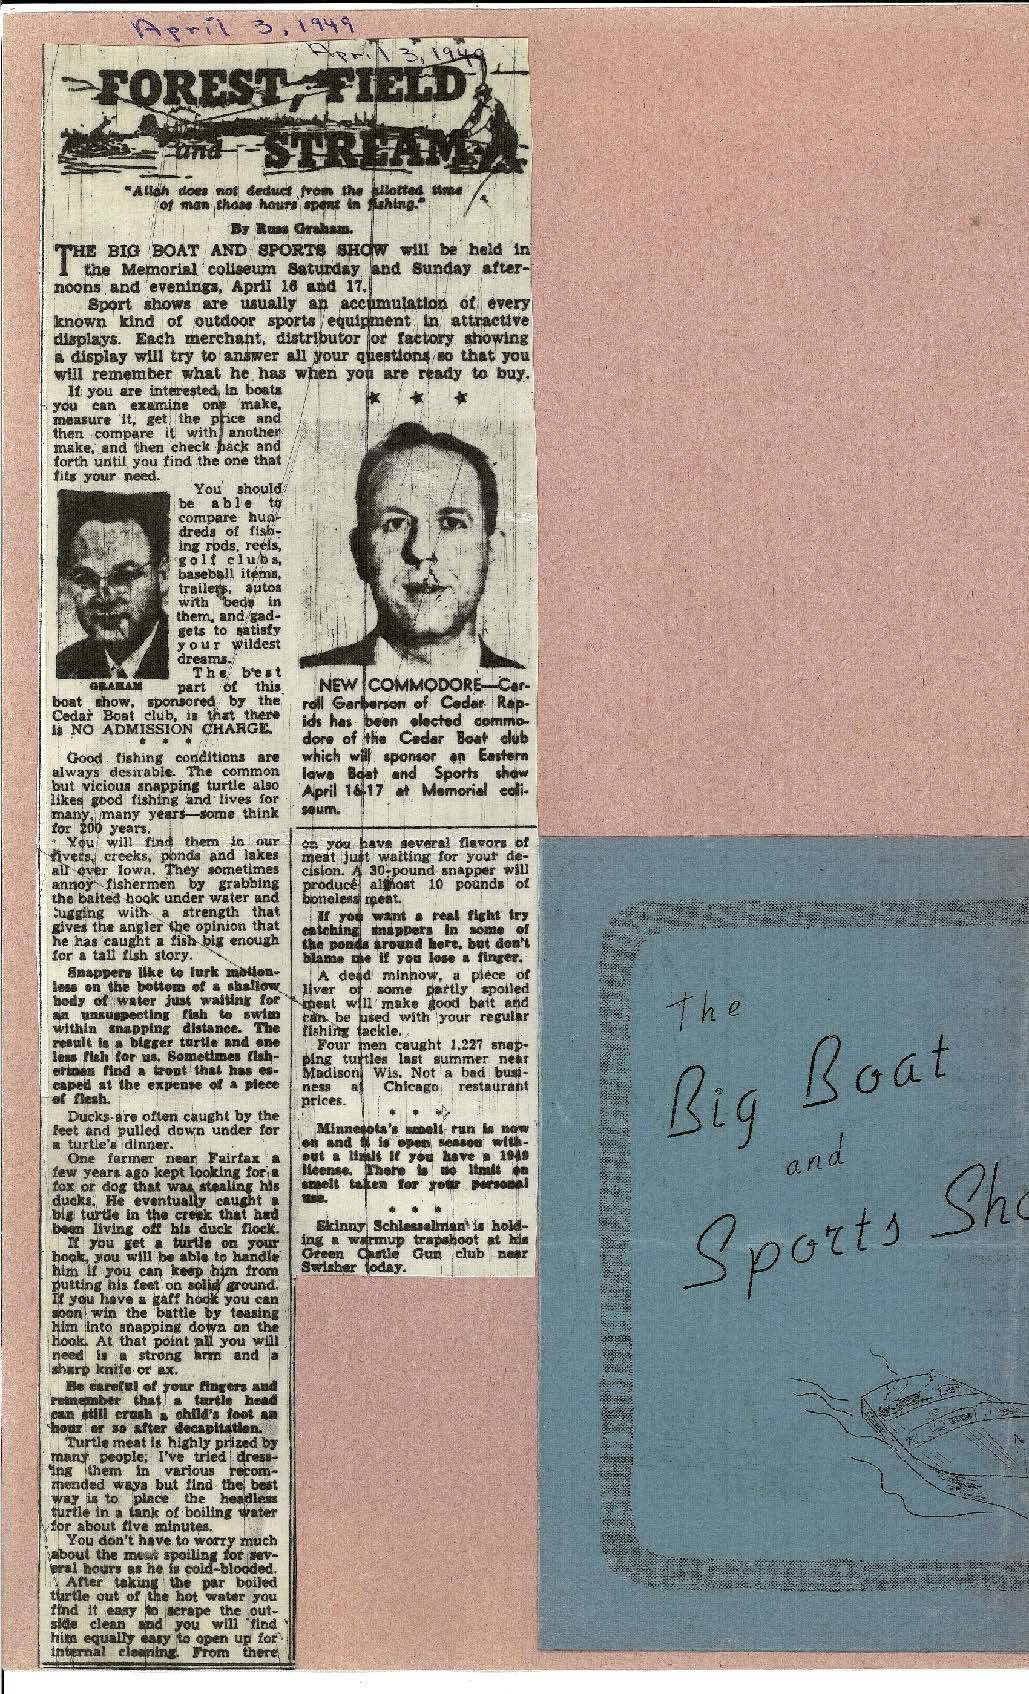 Gazette article April 3, 1948 about boat and sport show and announcing Carrol Gilbertson as new Commodore,